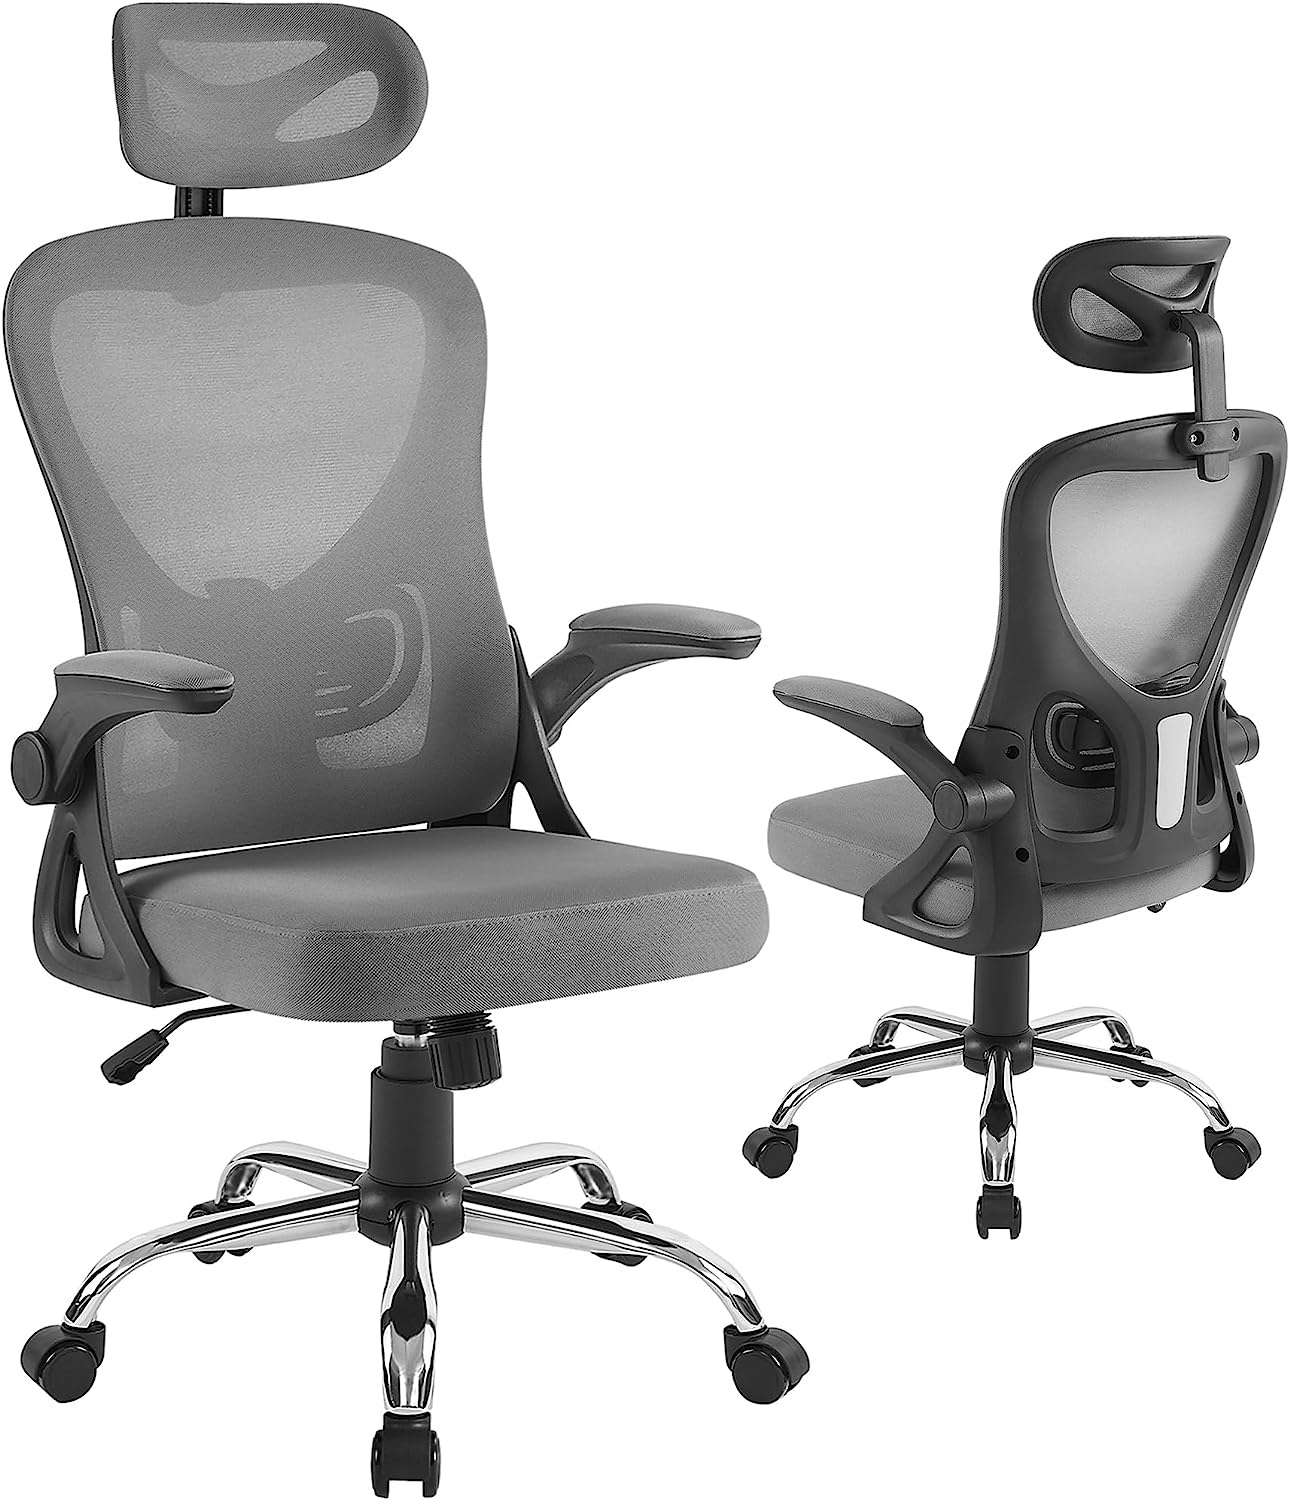 ROLF Mesh Back Lumbar Support for Office Chair